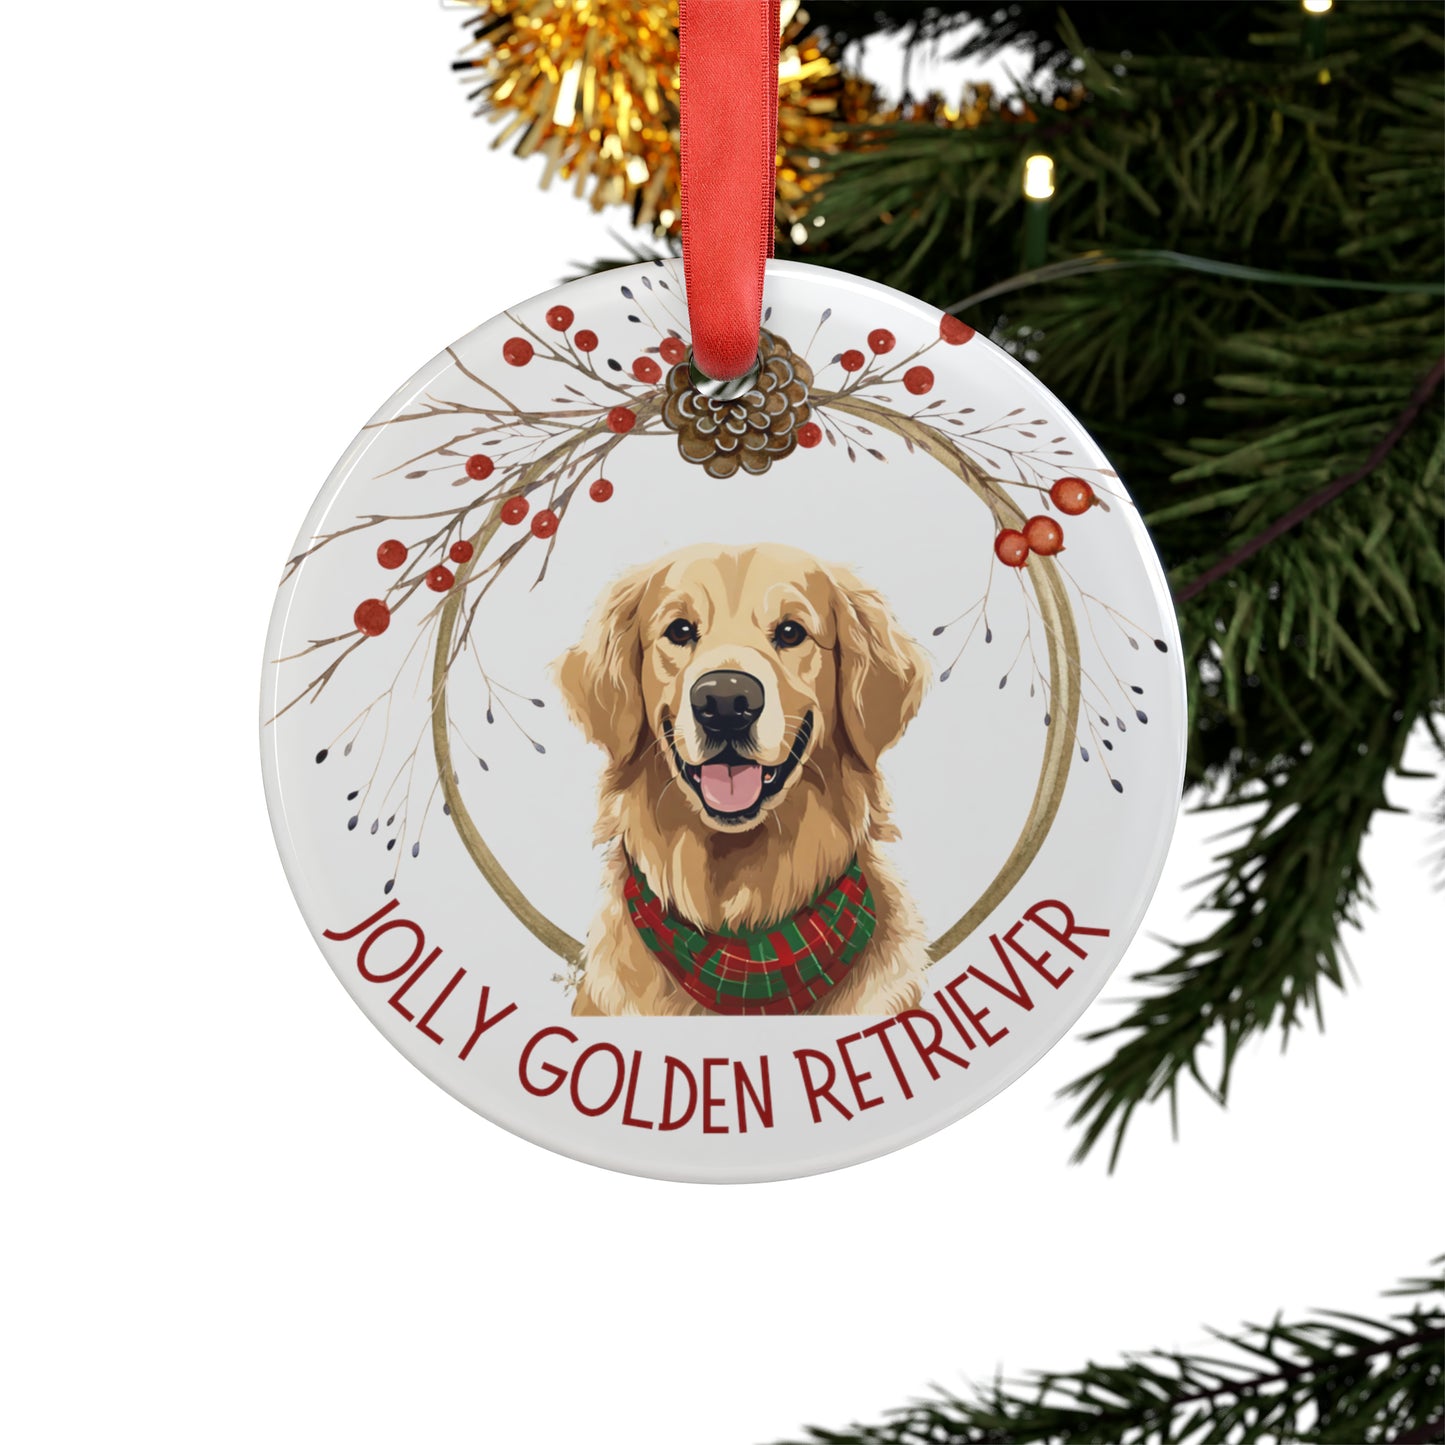 Golden Retriever Holiday Ornament with Ribbon